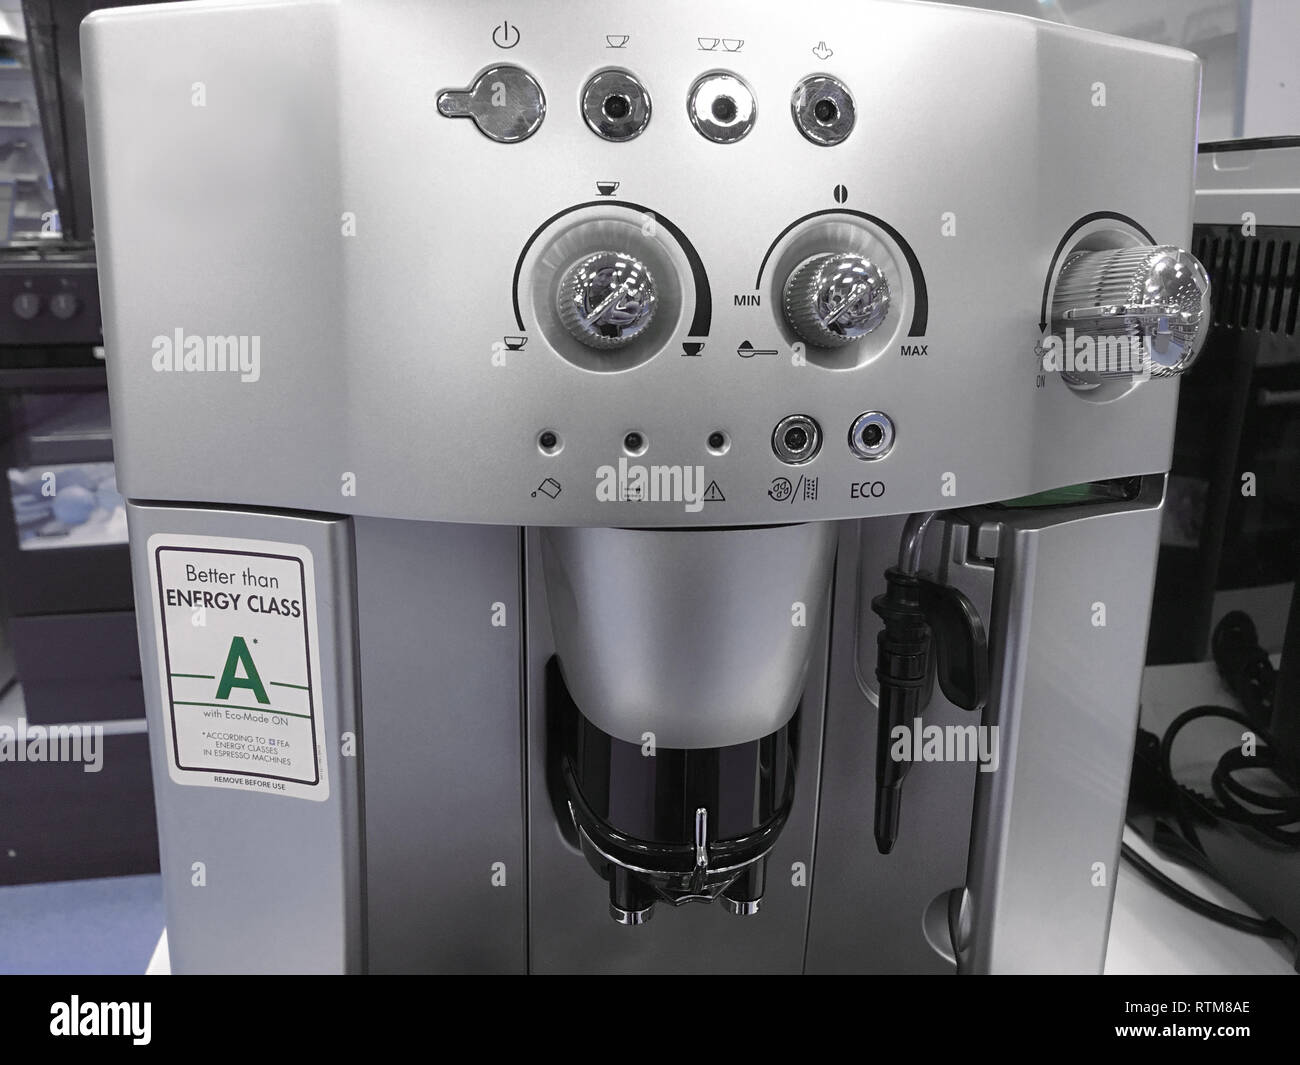 automatic coffee machines at exhibition on white kitchen background Stock Photo